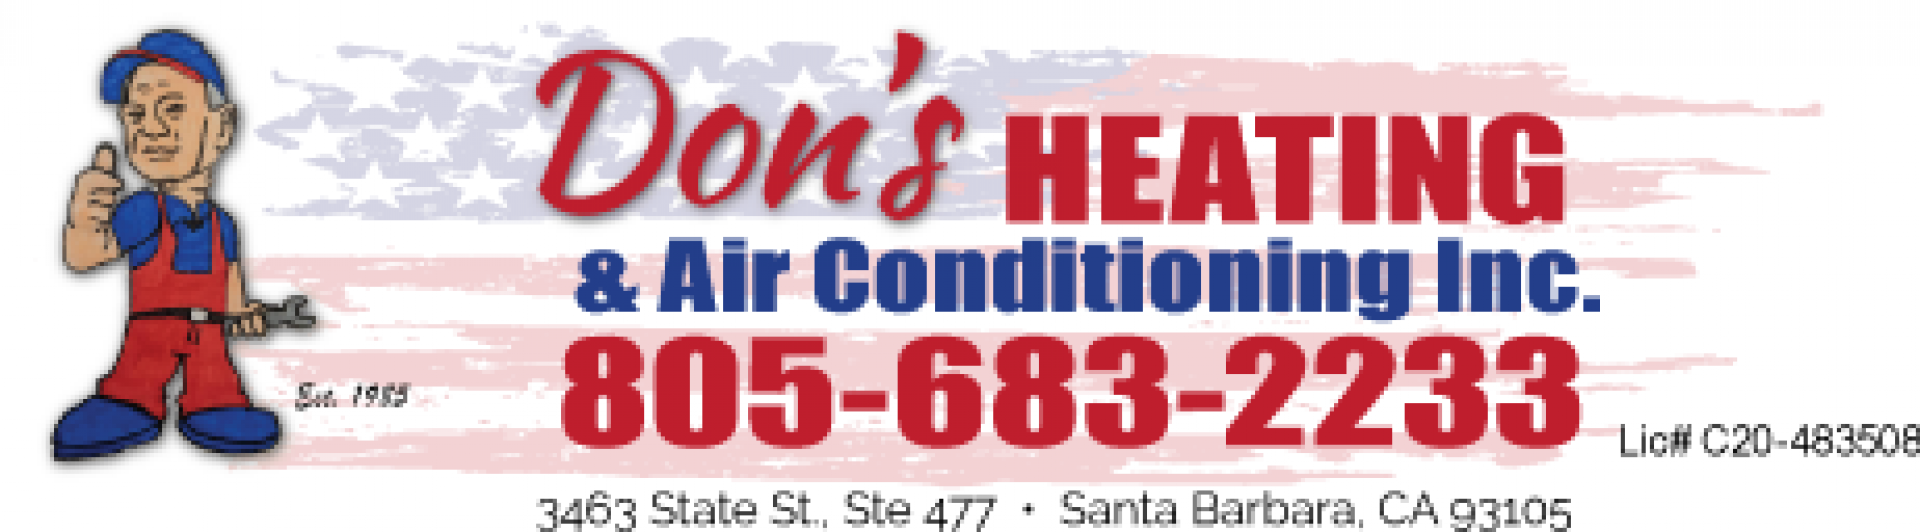 Don's Heating & Air Conditioning, Inc logo